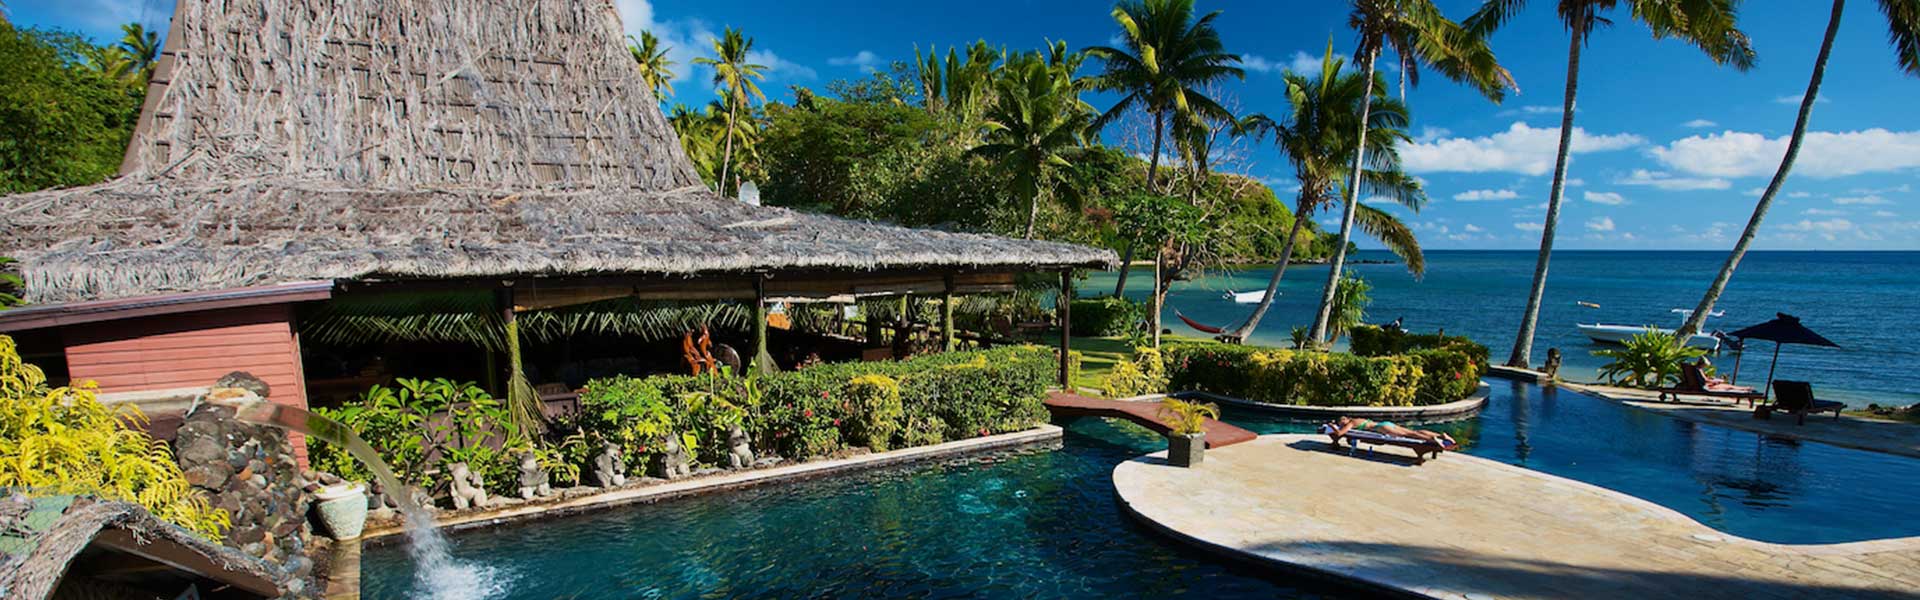 Fiji Diving Special: 6 Nights’ Stay w/ Return Flights, All Meals & More!